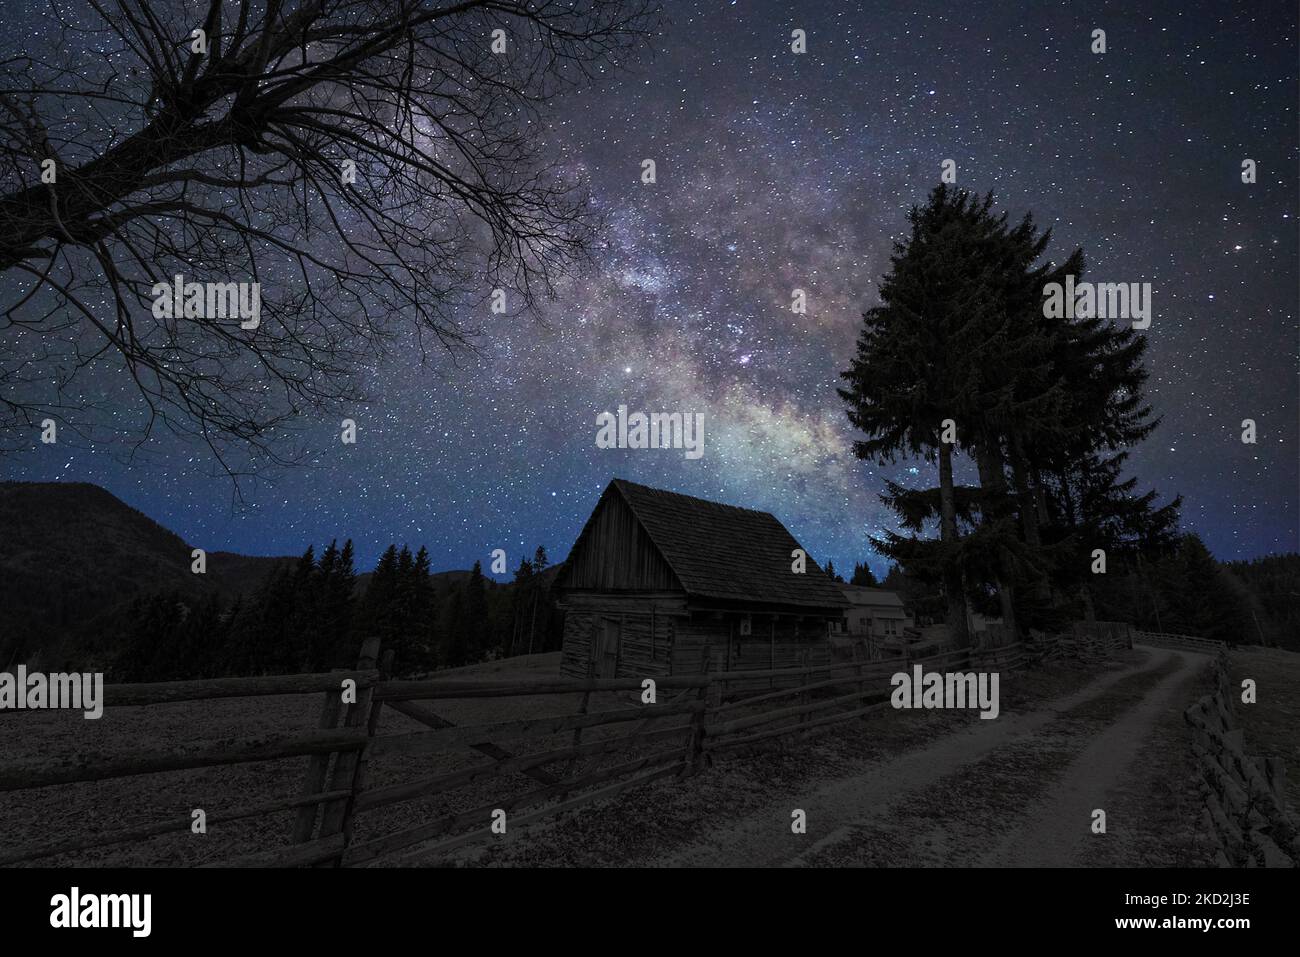 A mesmerizing starry night sky over the rural landscape Stock Photo